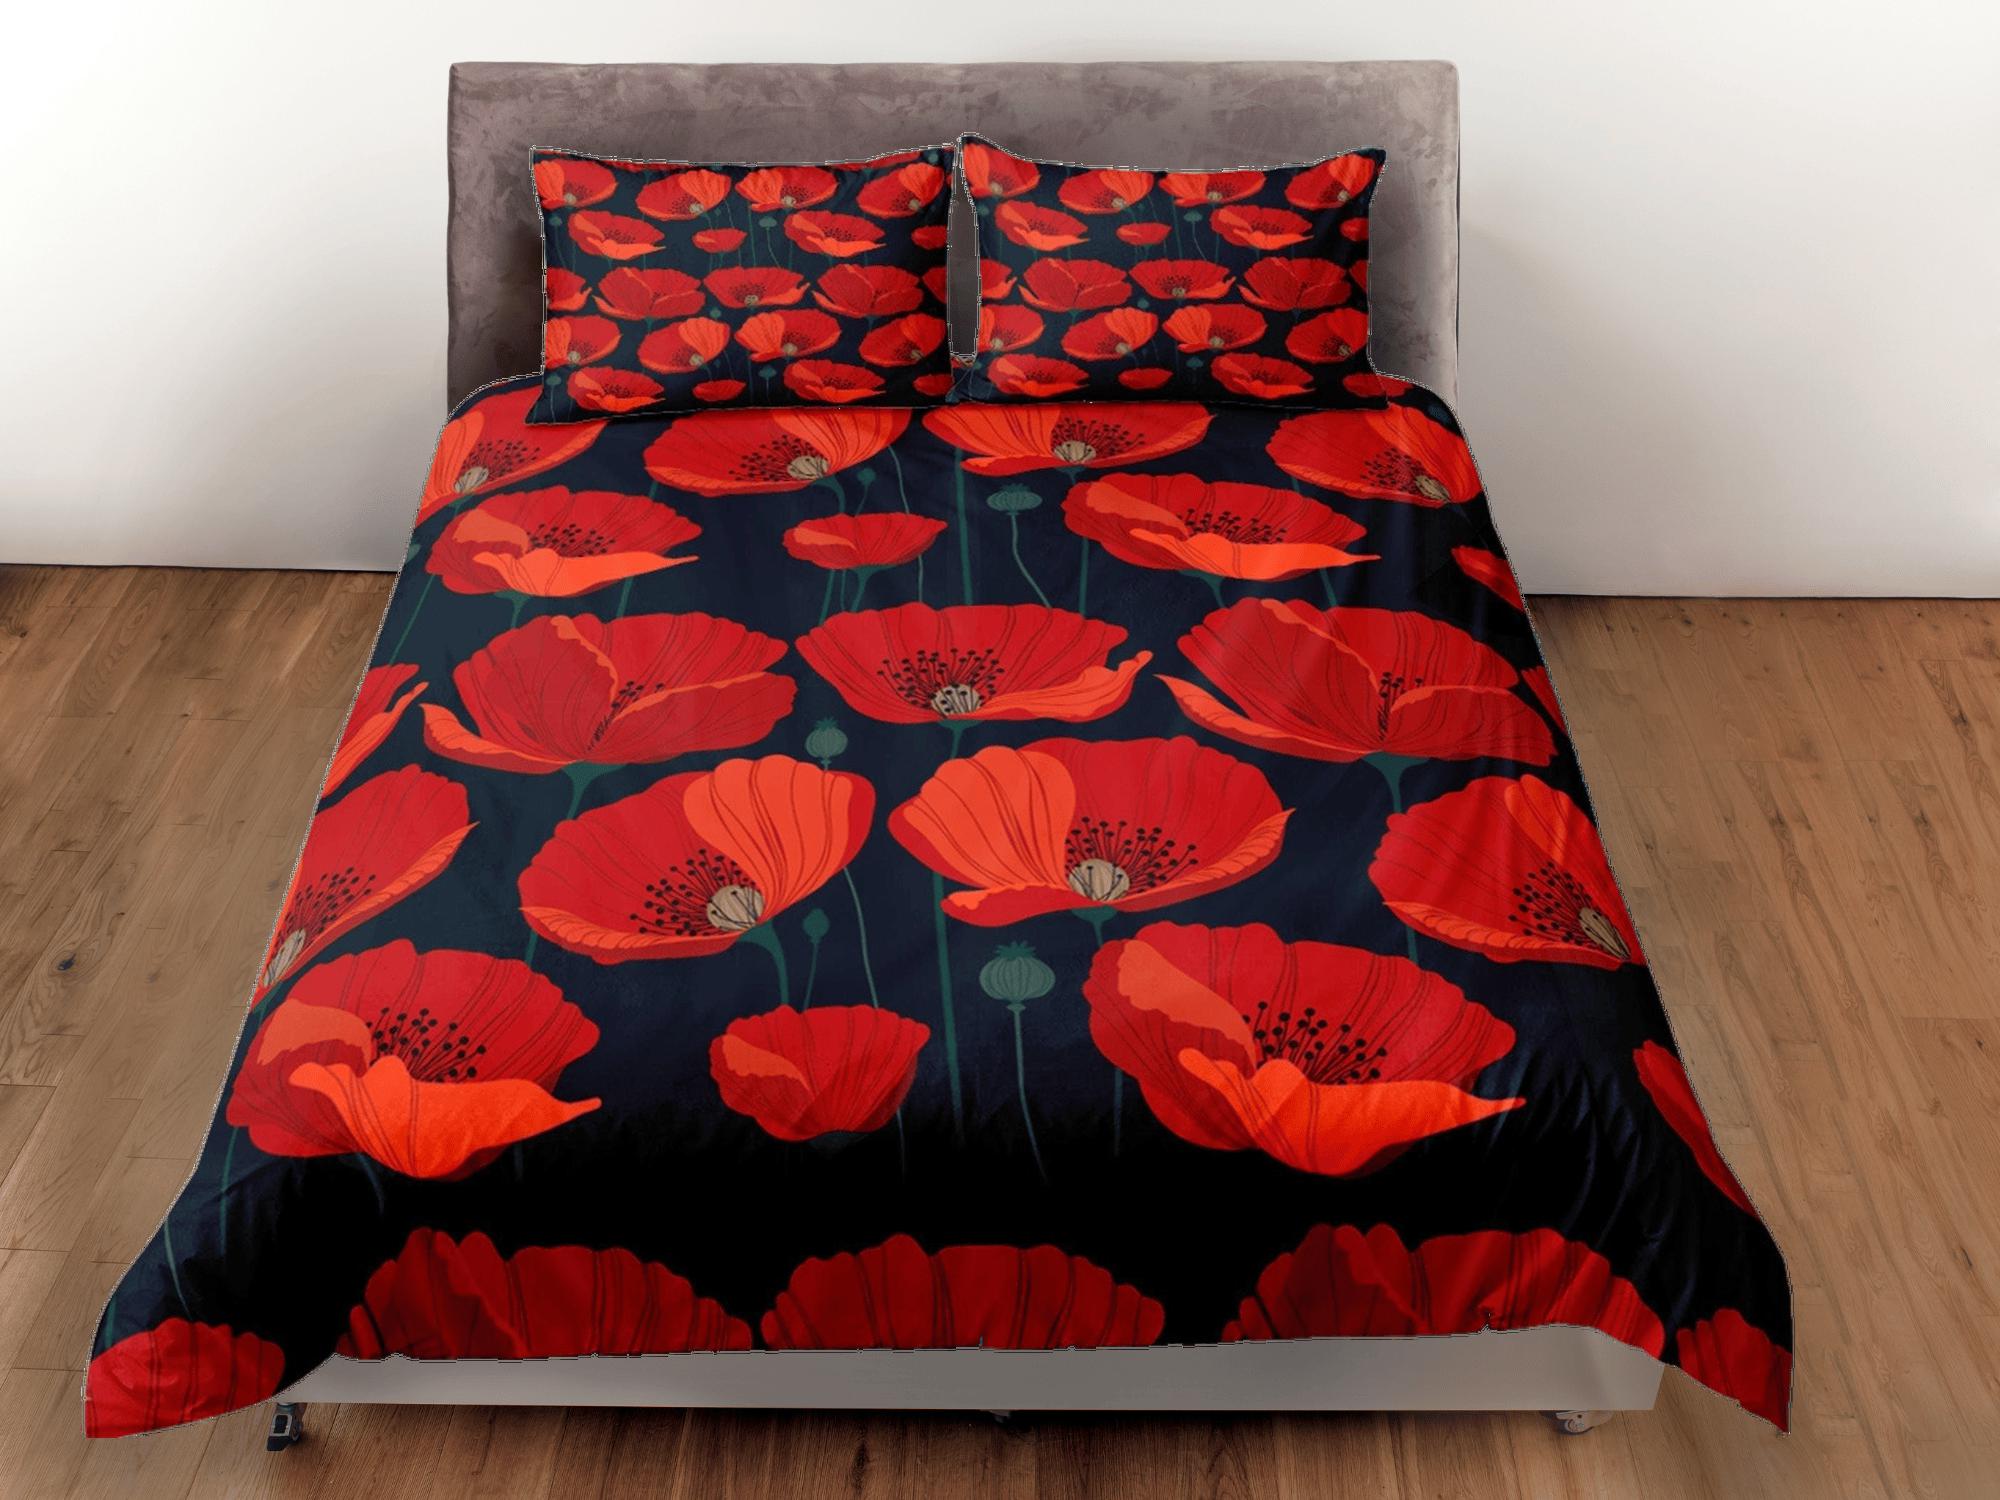 daintyduvet Red poppies floral duvet cover colorful bedding, teen girl bedroom, baby girl crib bedding boho maximalist bedspread aesthetic bedding